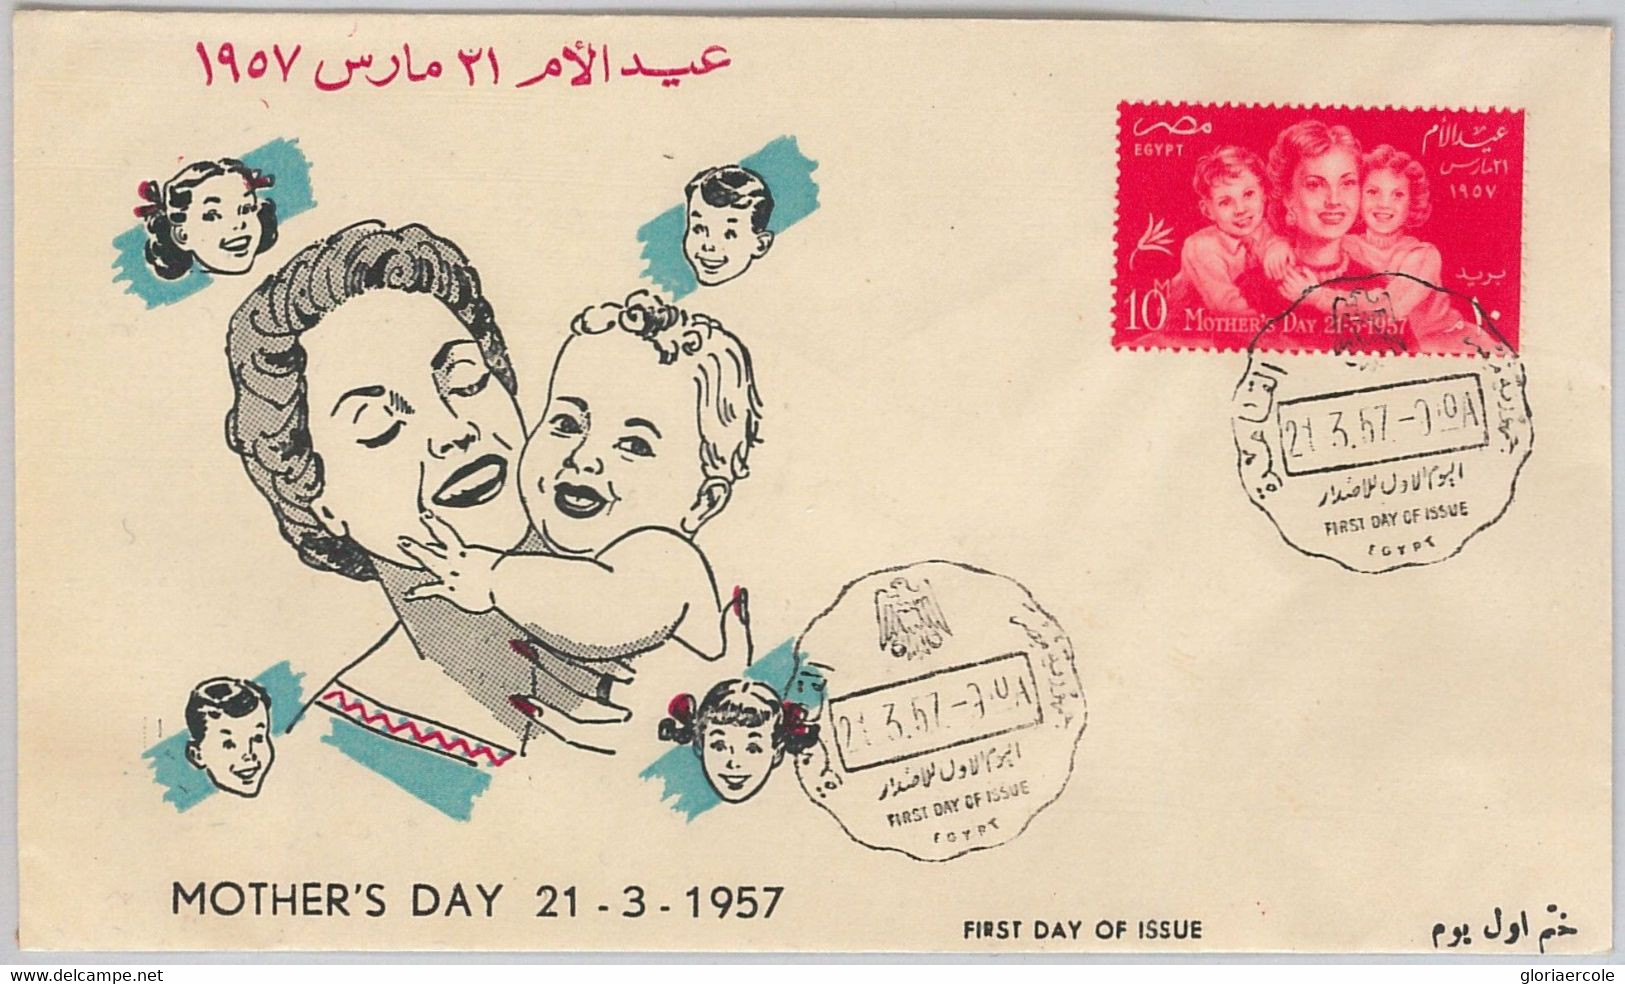 45455- EGYPT مِصر‎ - POSTAL HISTORY - FDC COVER 1959 Scott# 391 Mother’s Day - Mother's Day